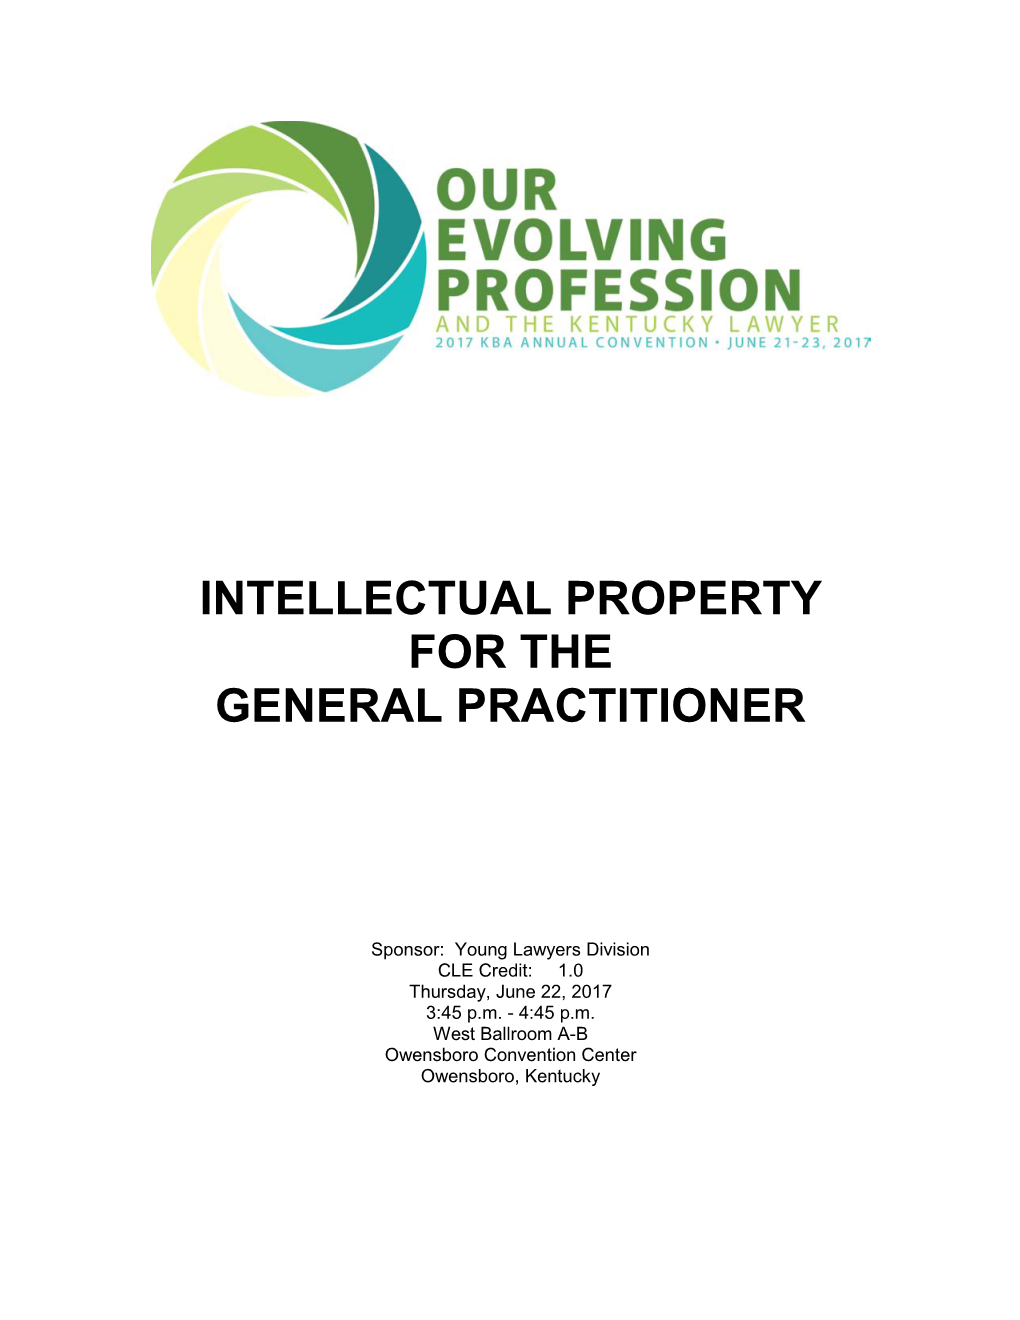 Intellectual Property for the General Practitioner